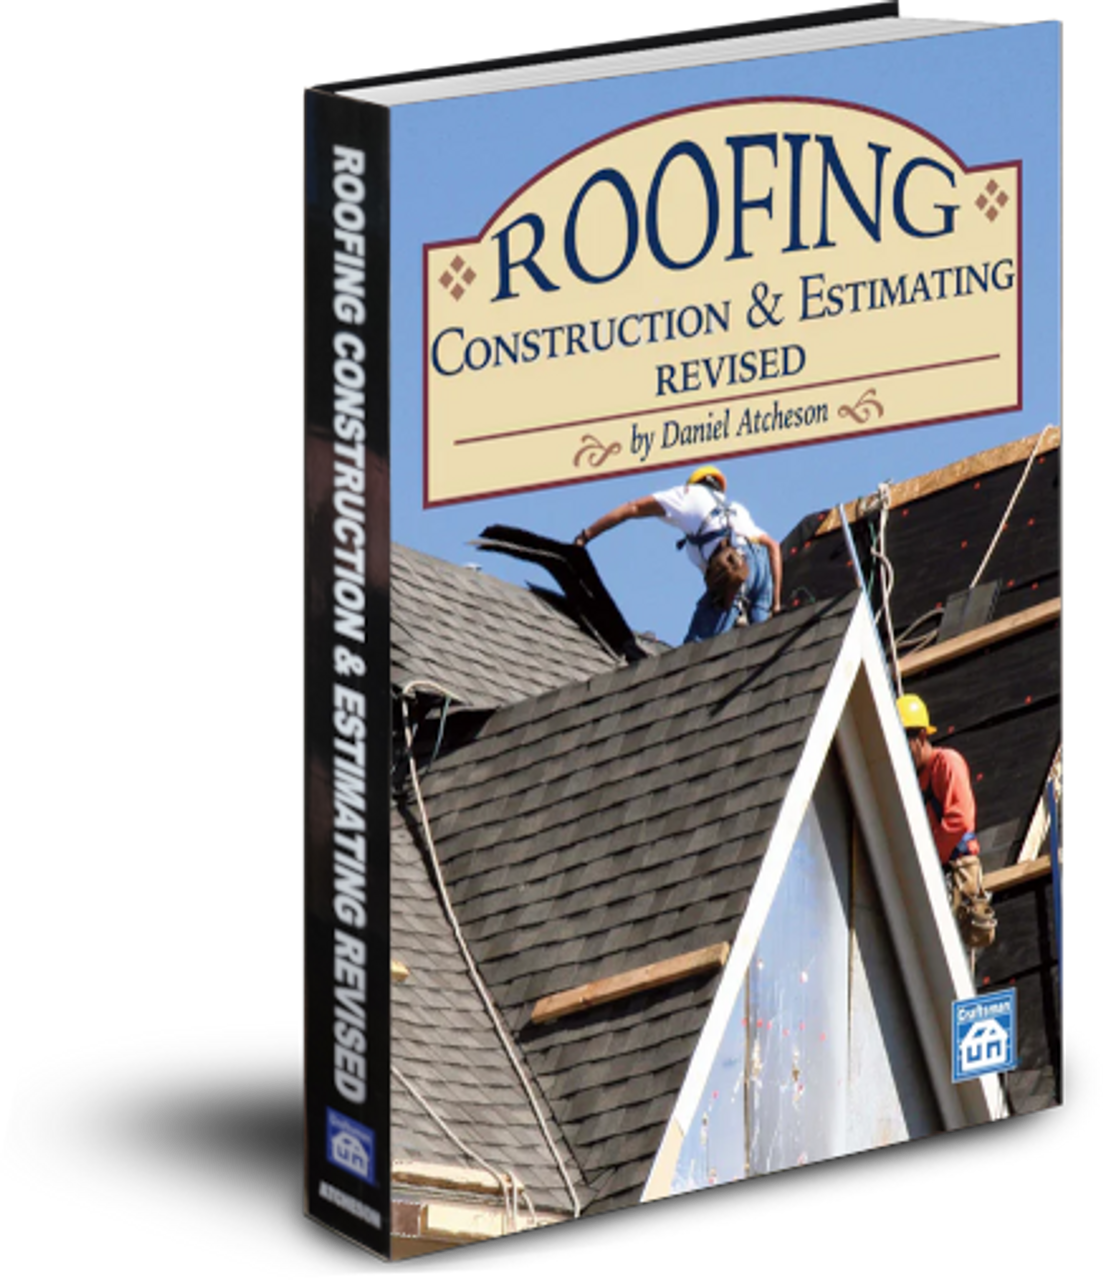 Roofing Construction & Estimating